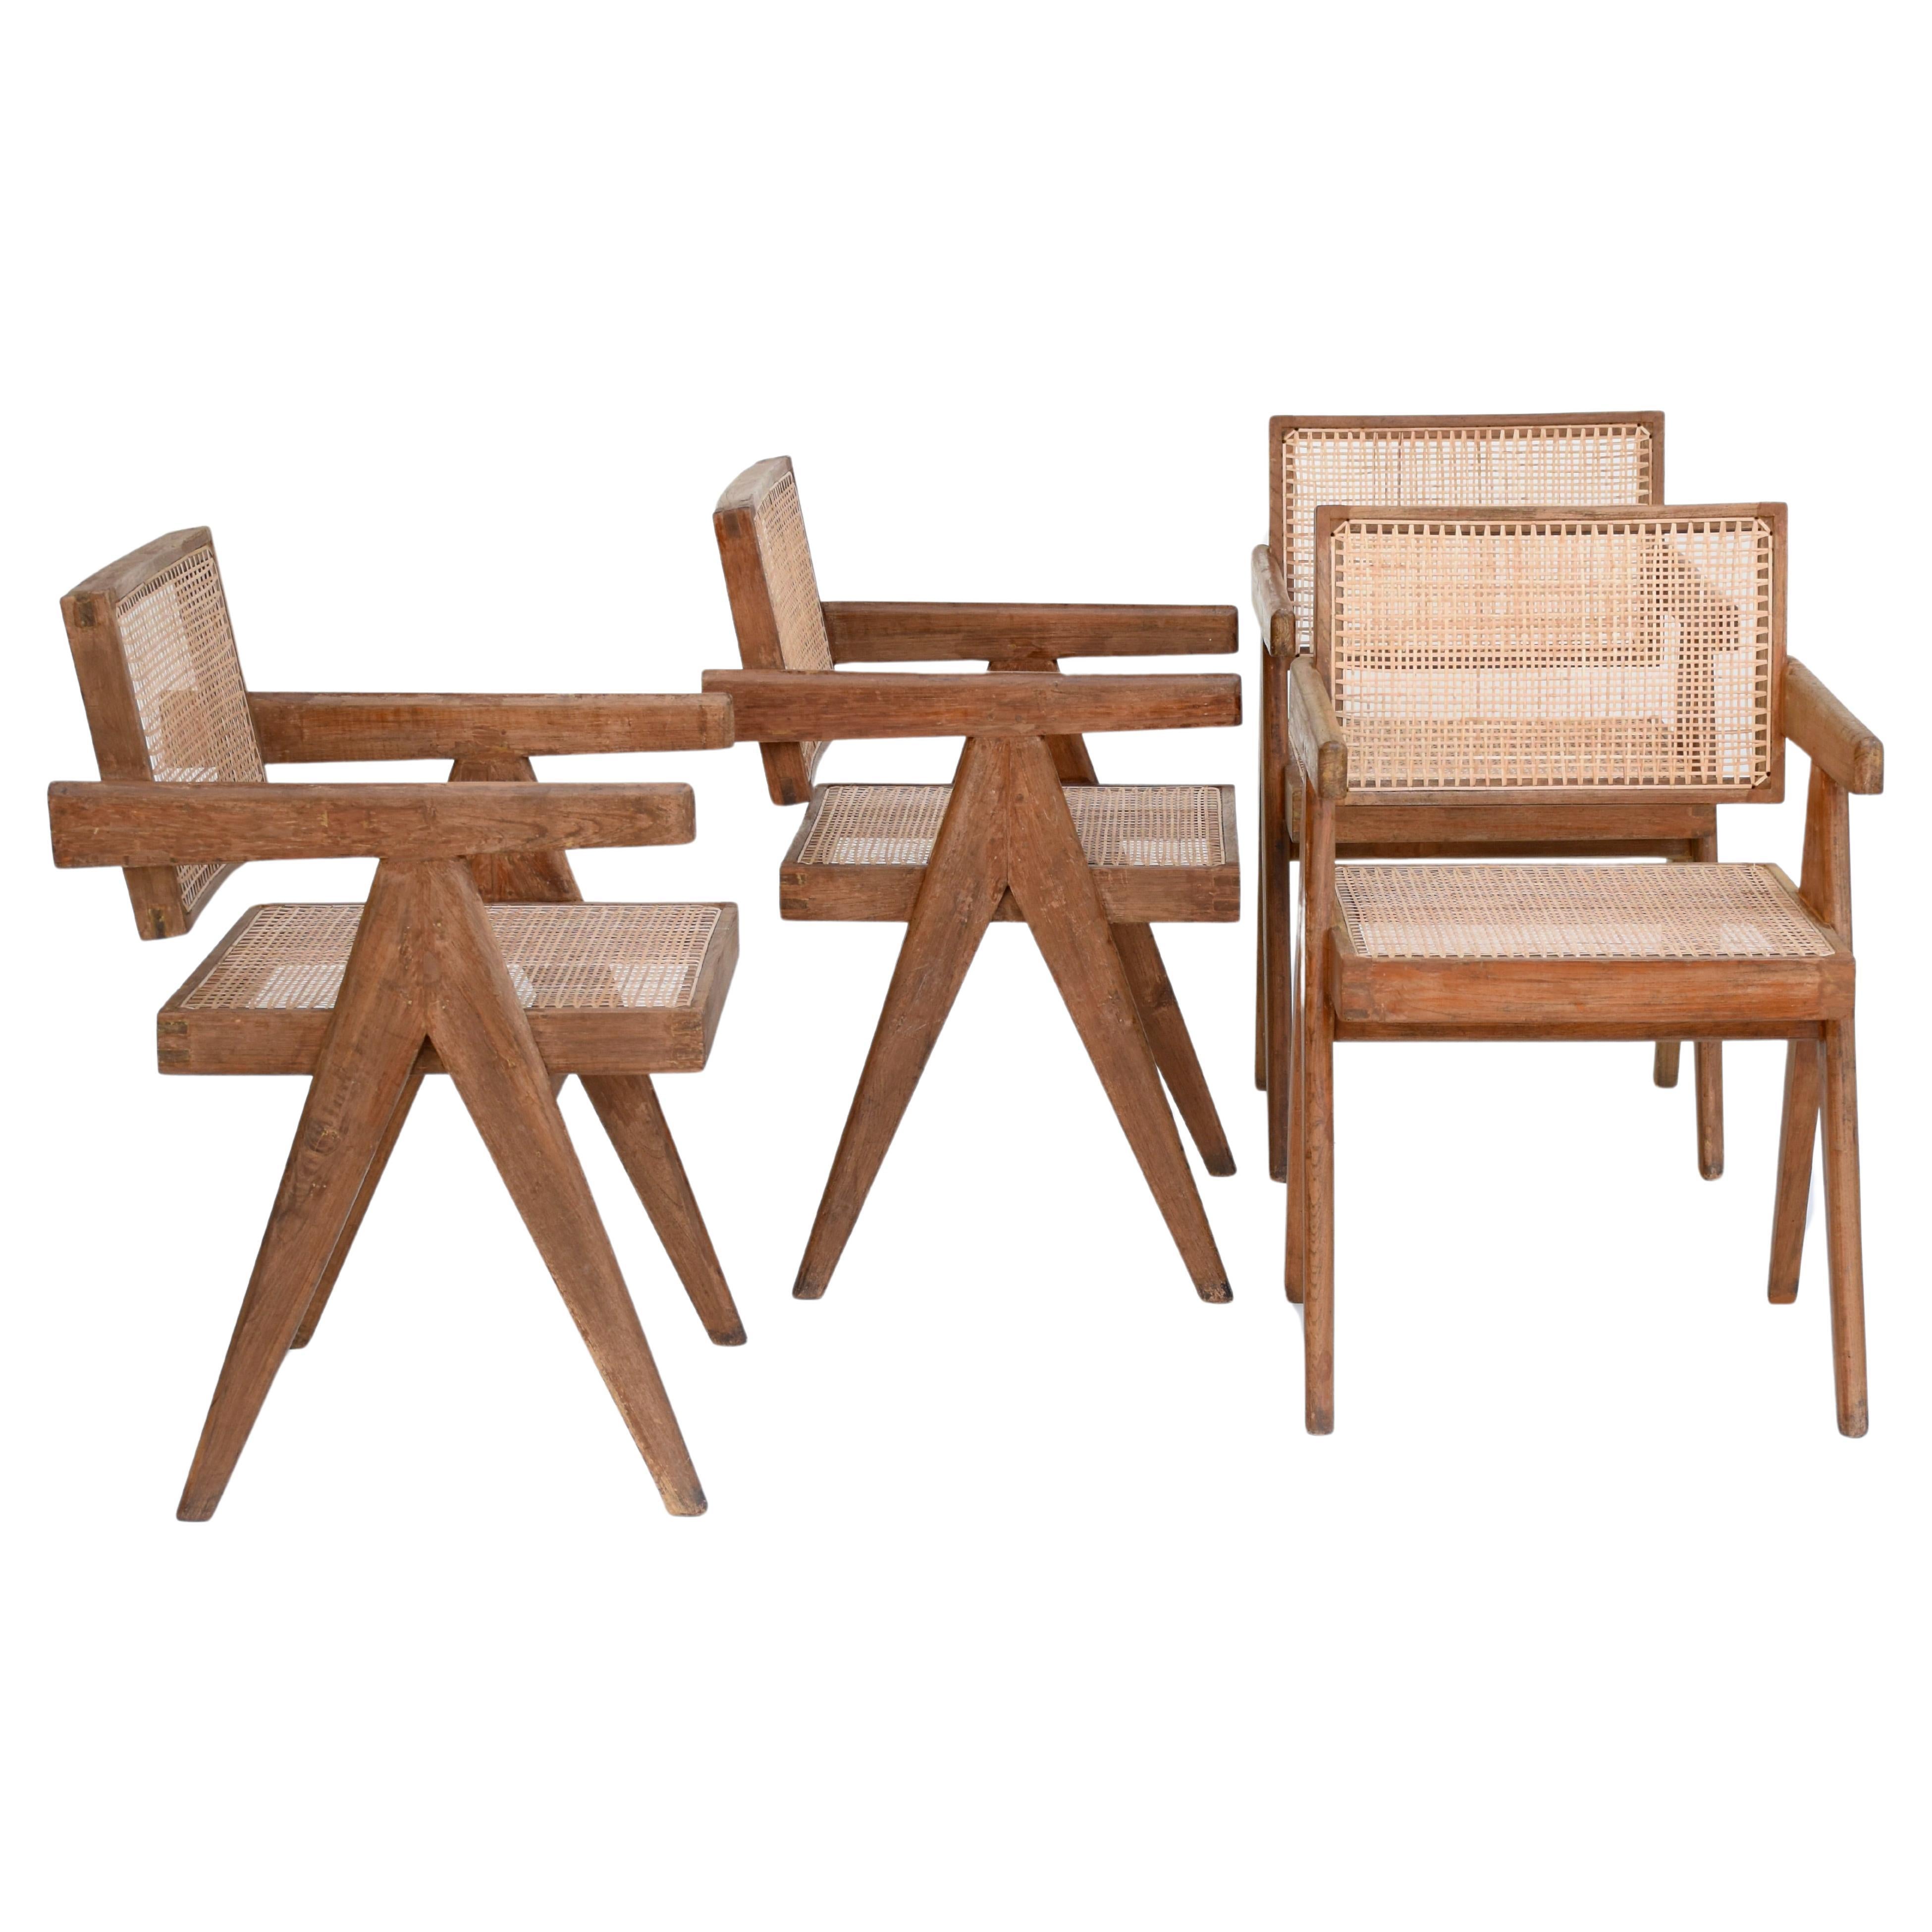 Pierre Jeanneret Set of 10 Floating Back Chairs Ca. 1960 from Chandigarh For Sale 3